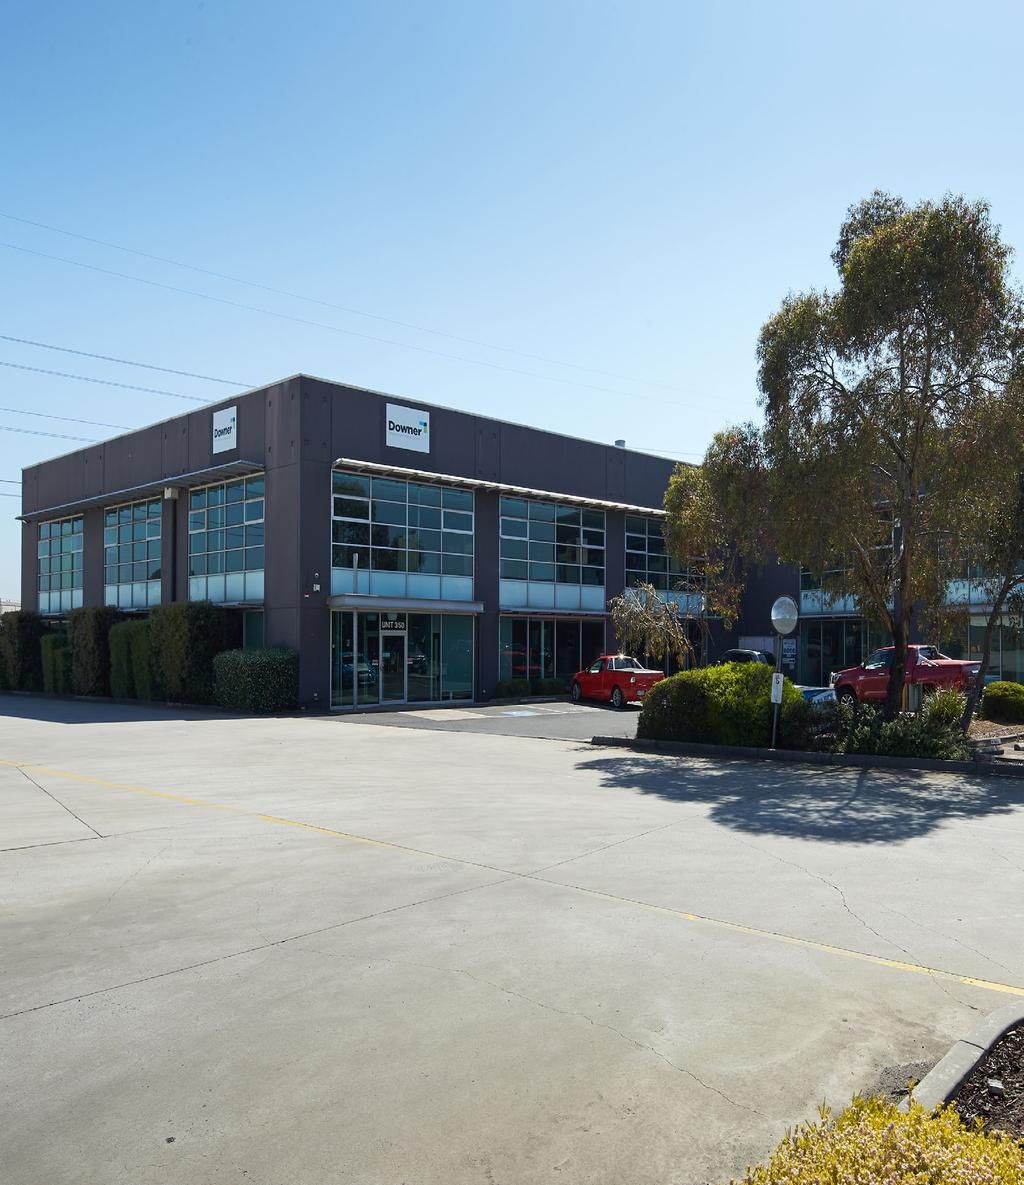 Unit 1 is a unique two level office building, with fitout for use by an occupier, plus a small warehouse.